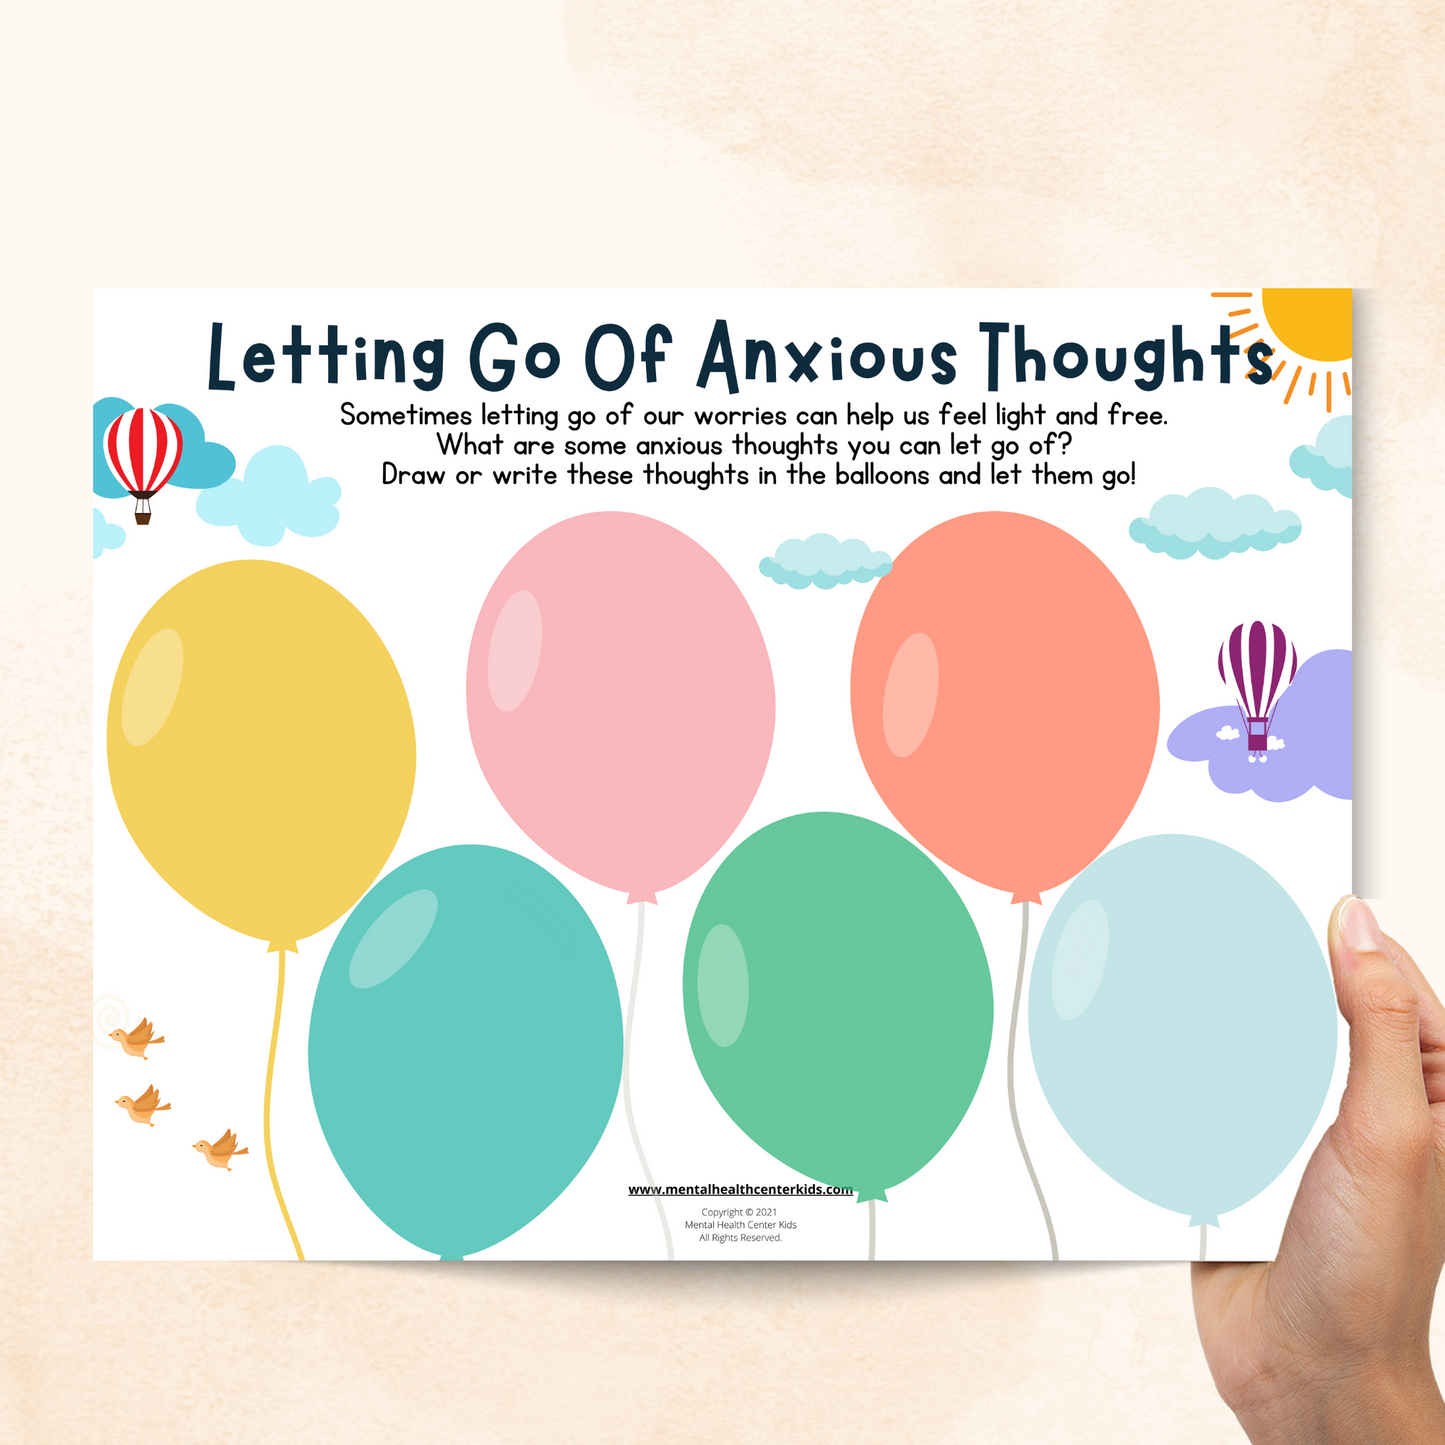 Letting Go of Anxious Thoughts